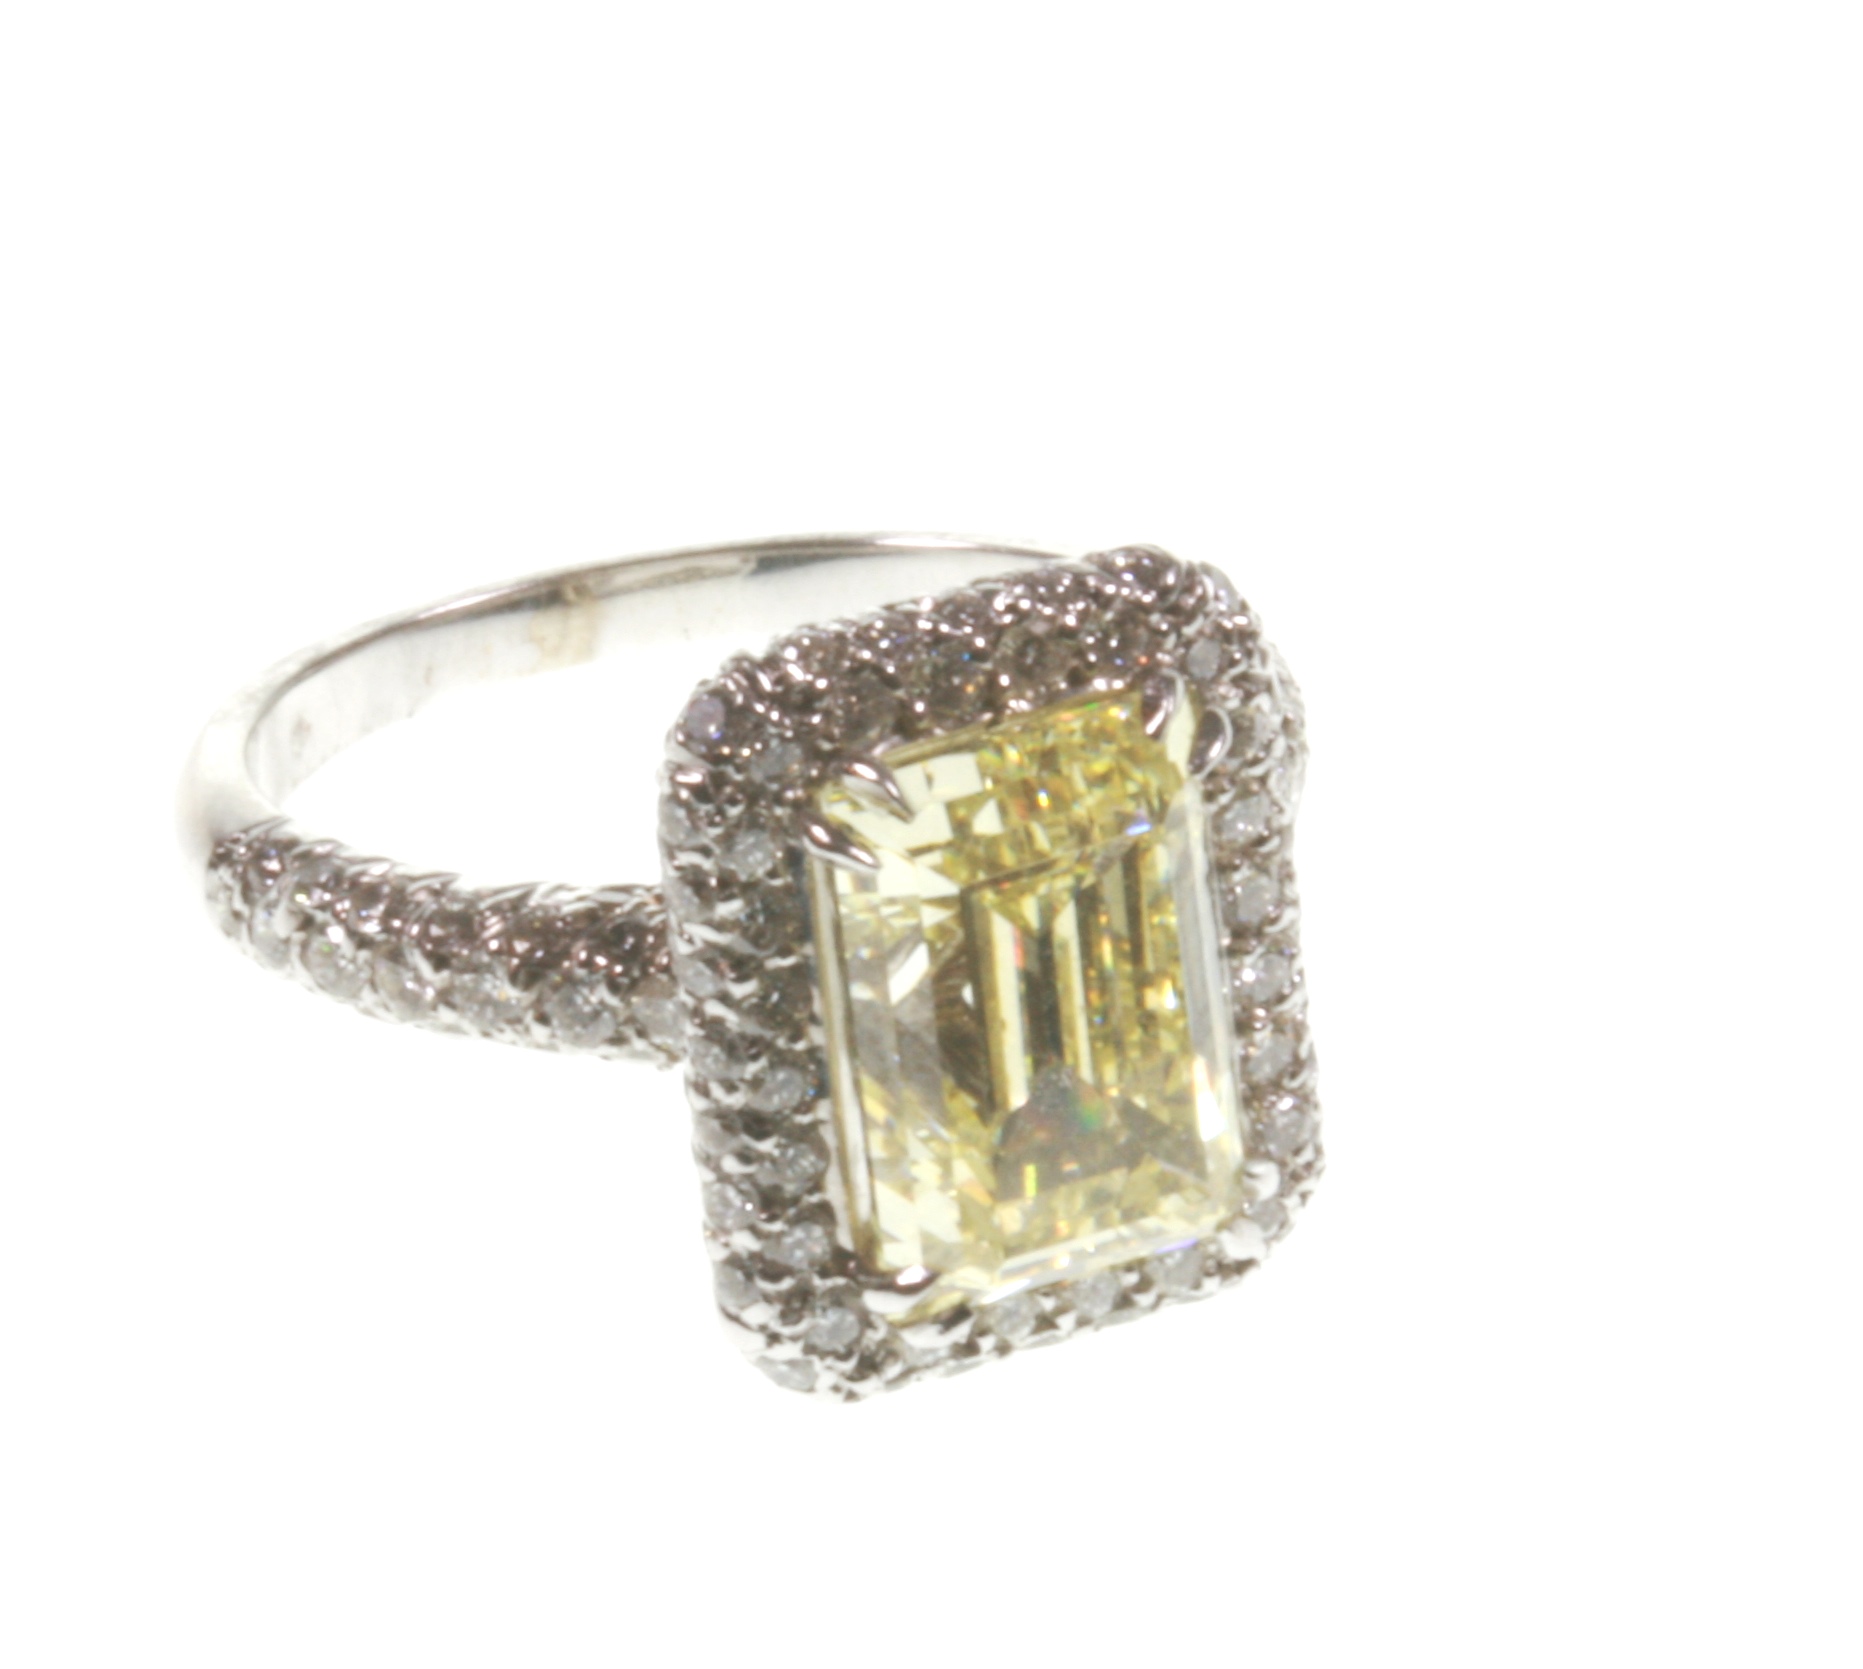 A Natural Fancy Yellow Diamond Dress Ring. 3.75 carats VS2. Size M. With GIA of America certificate.